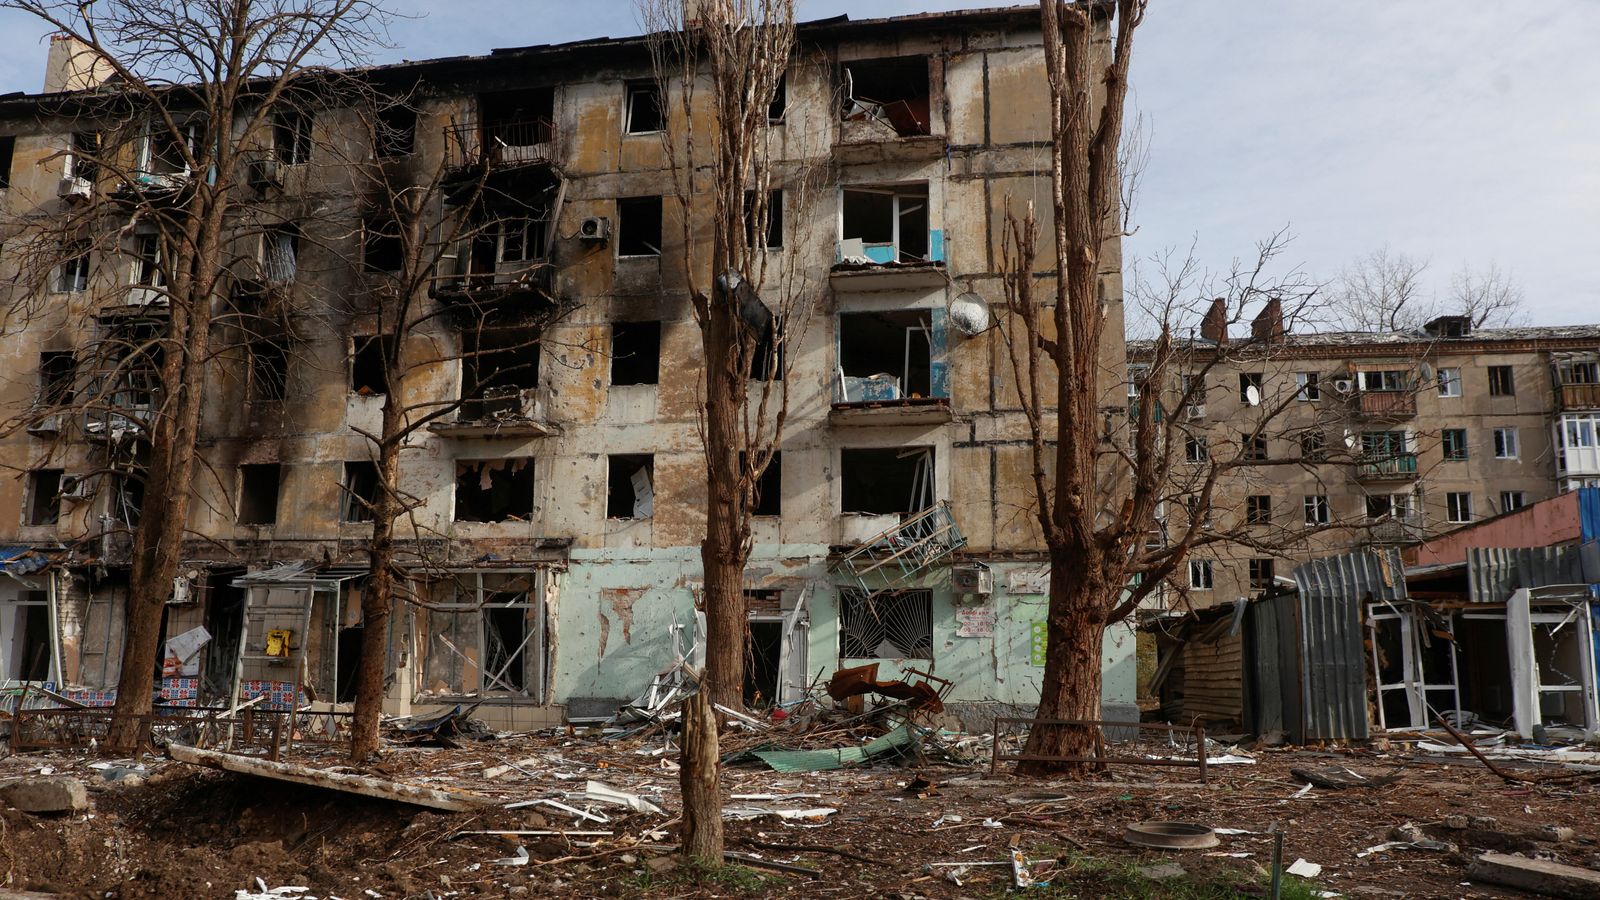 ukraine's army chief says forces have pulled out of frontline city to 'avoid encirclement'